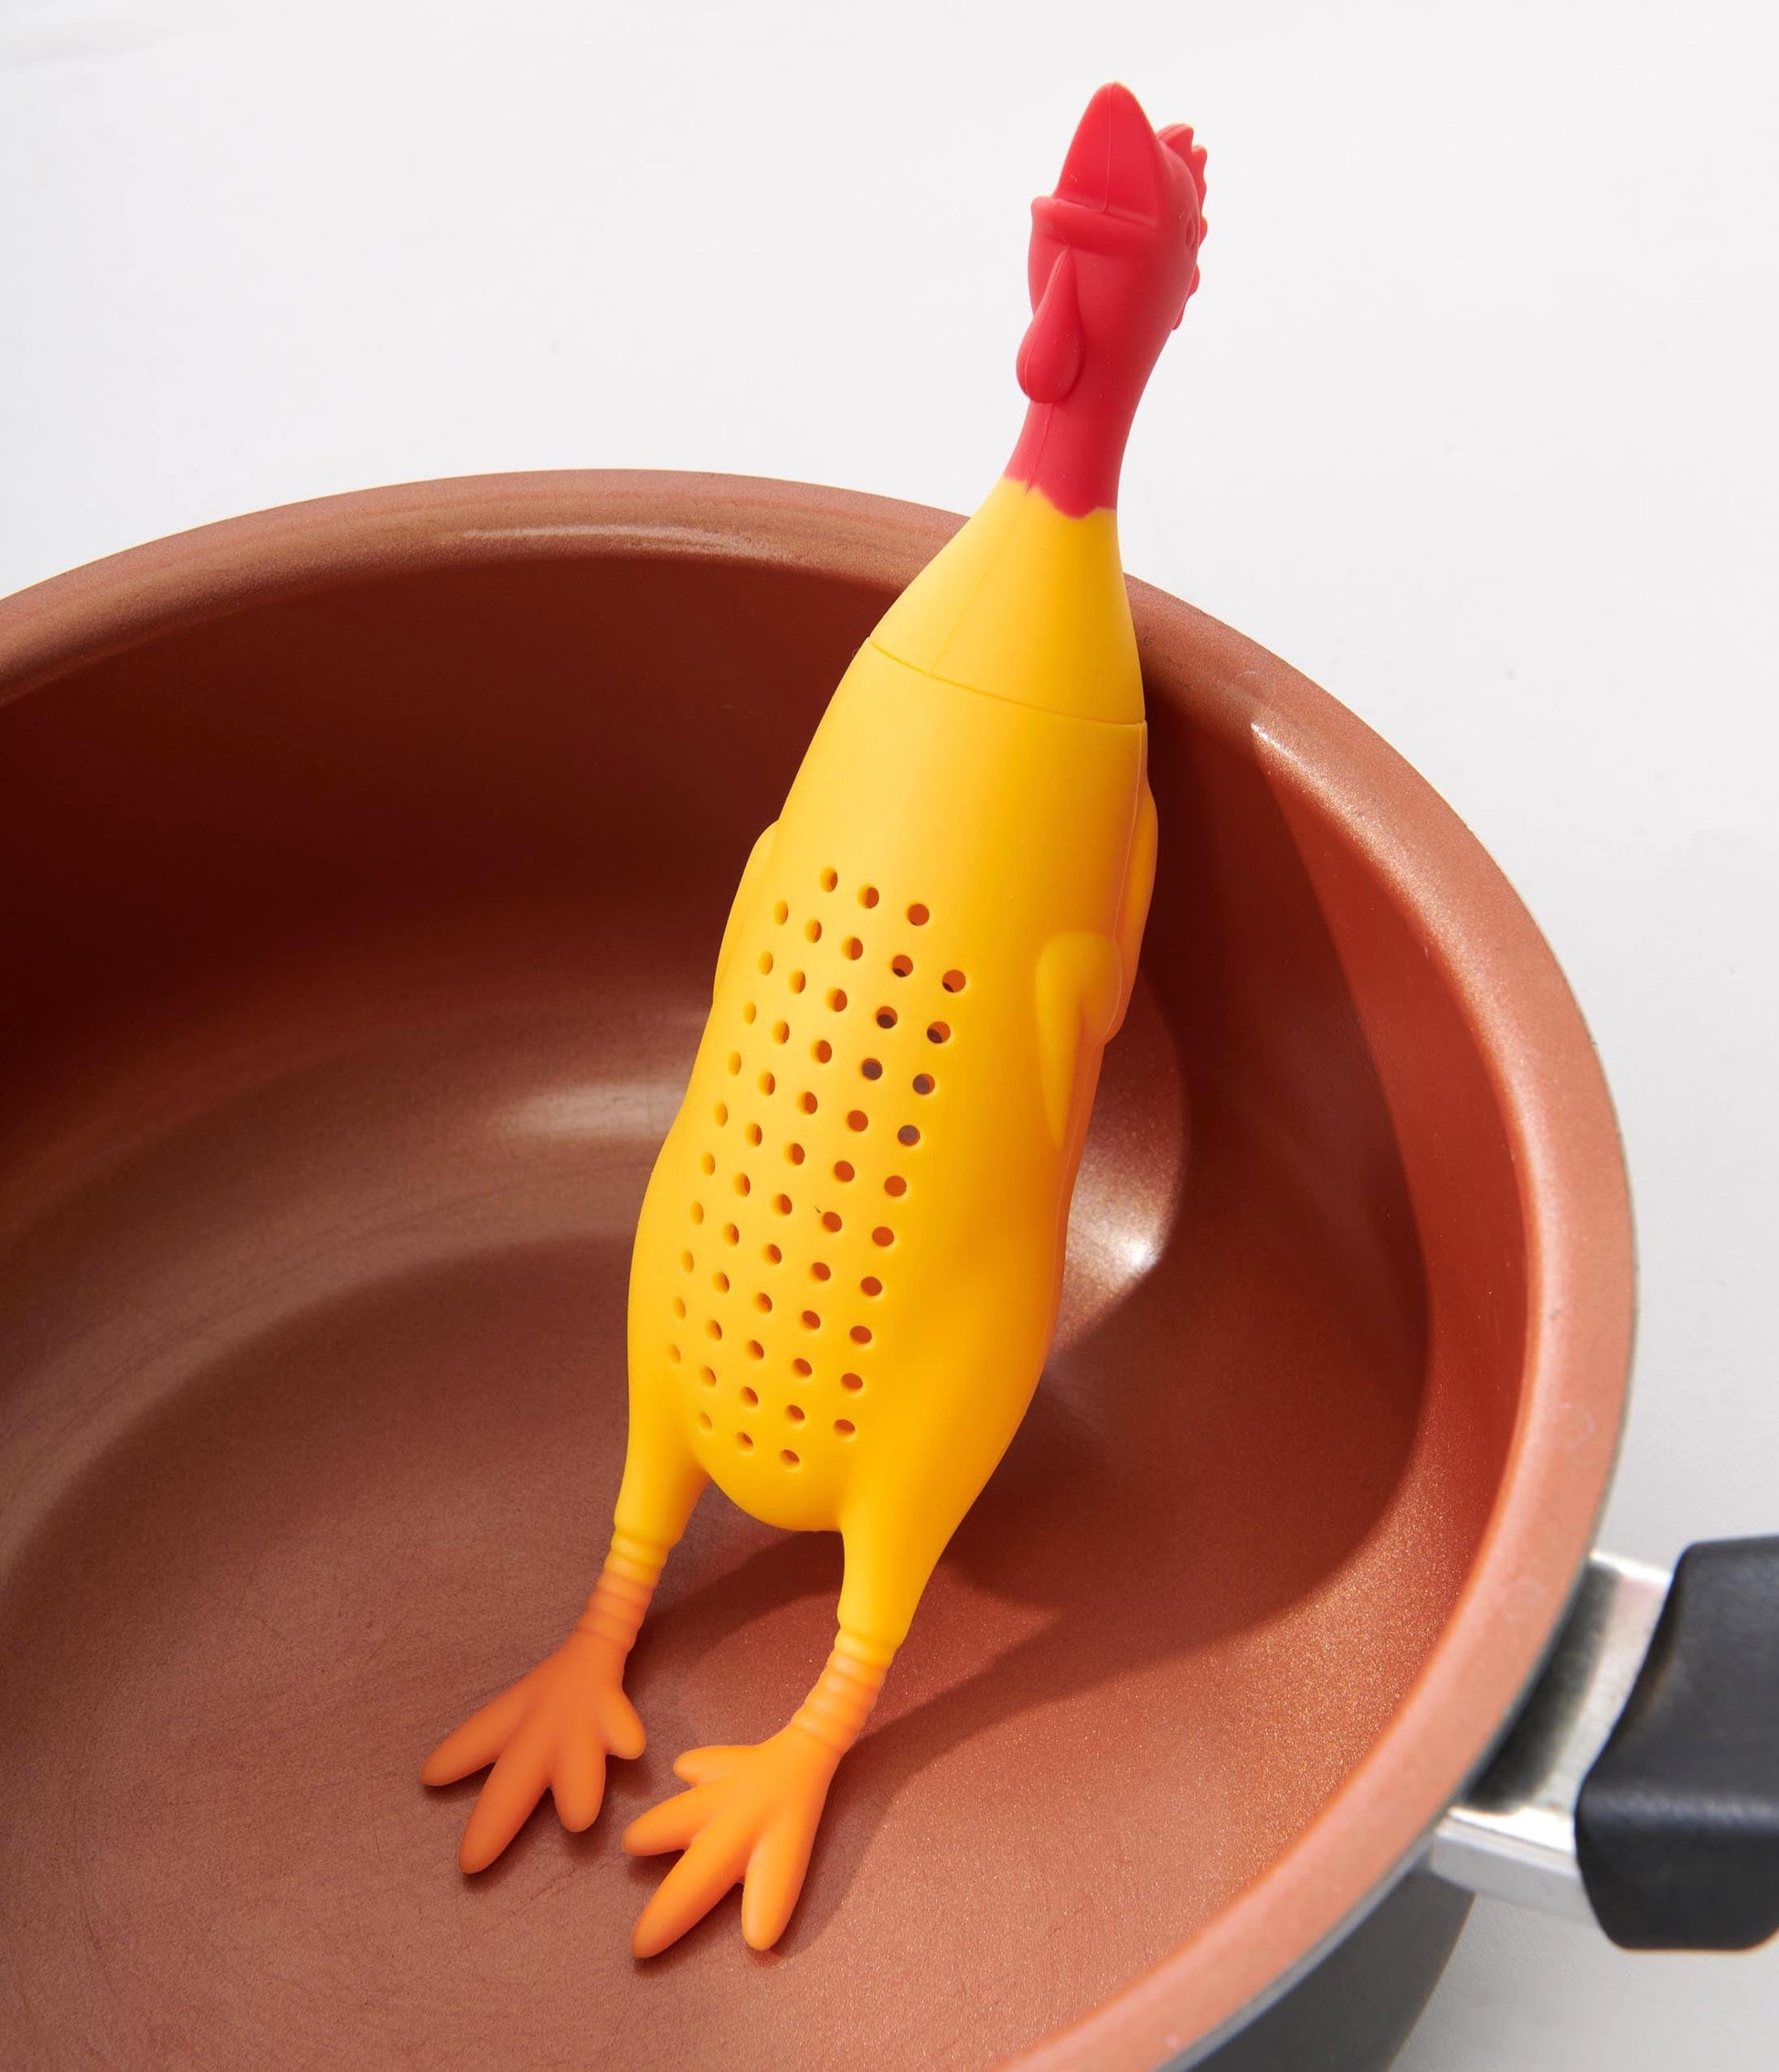 Yellow Le Crock Coq Chicken Herb Infuser - Unique Vintage - Womens, ACCESSORIES, GIFTS/HOME